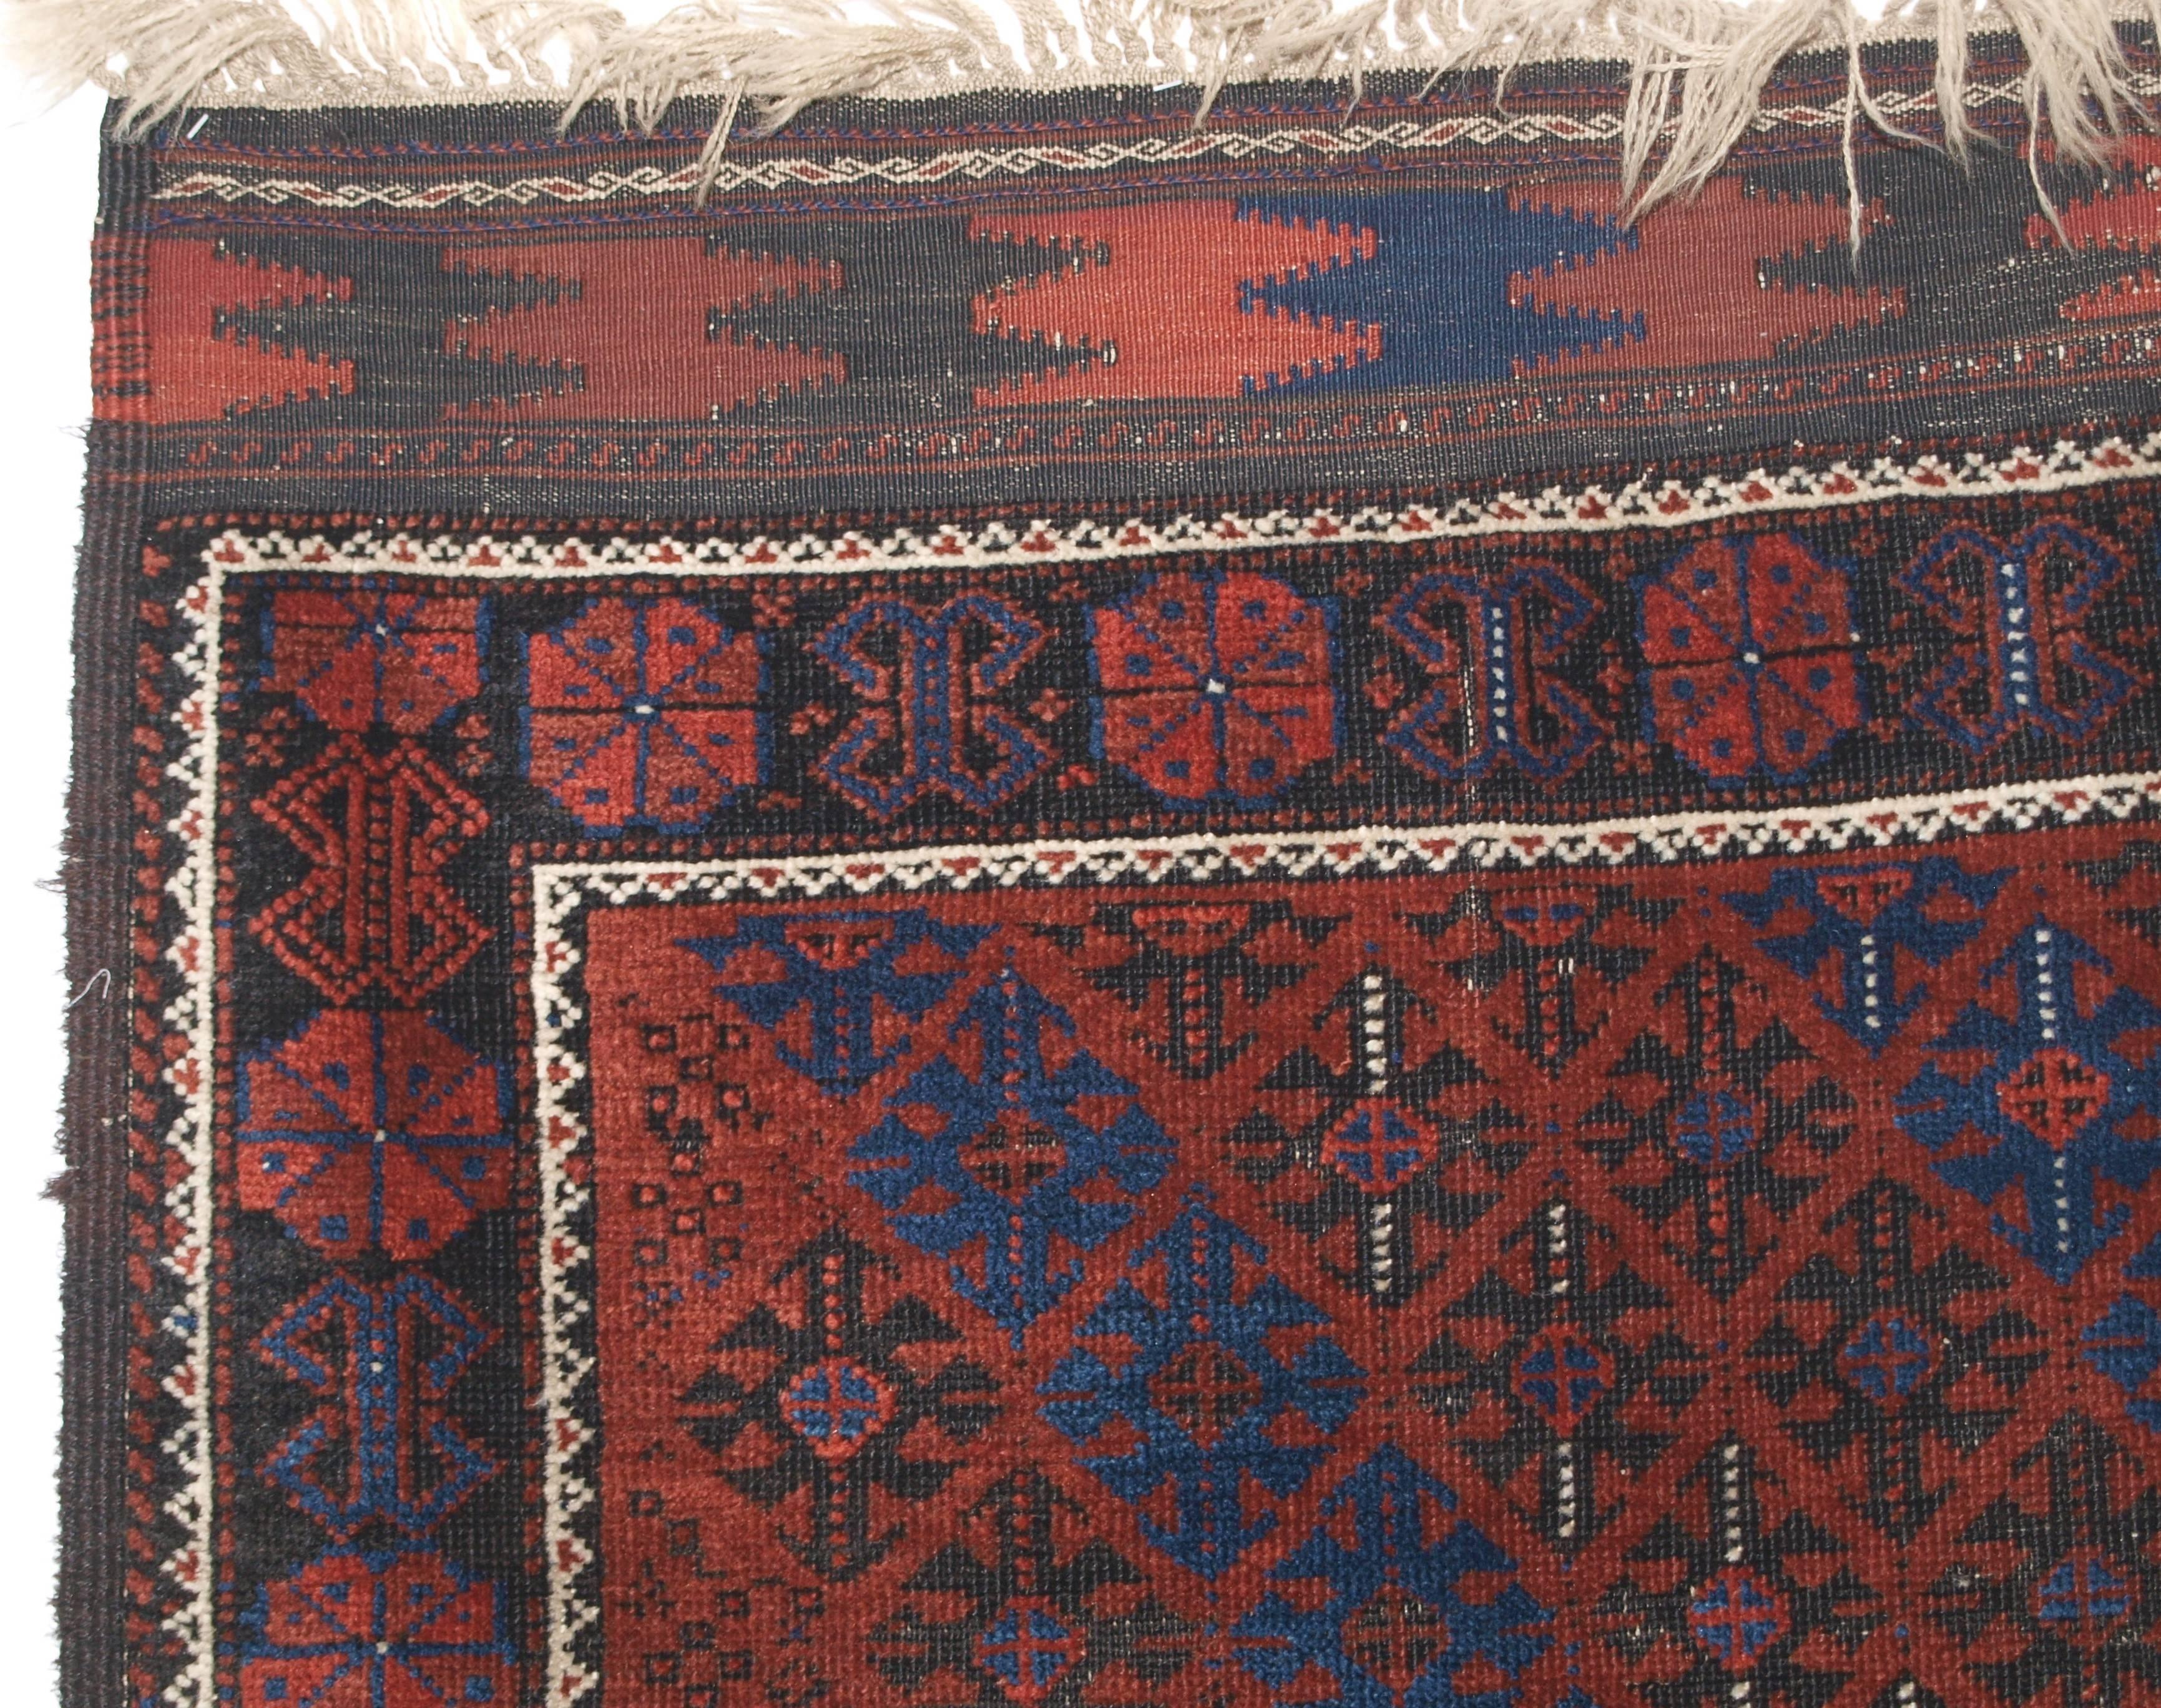 Late 19th Century Antique Baluch Rug from Western Afghanistan, Probably Timuri Tribe, circa 1880 For Sale